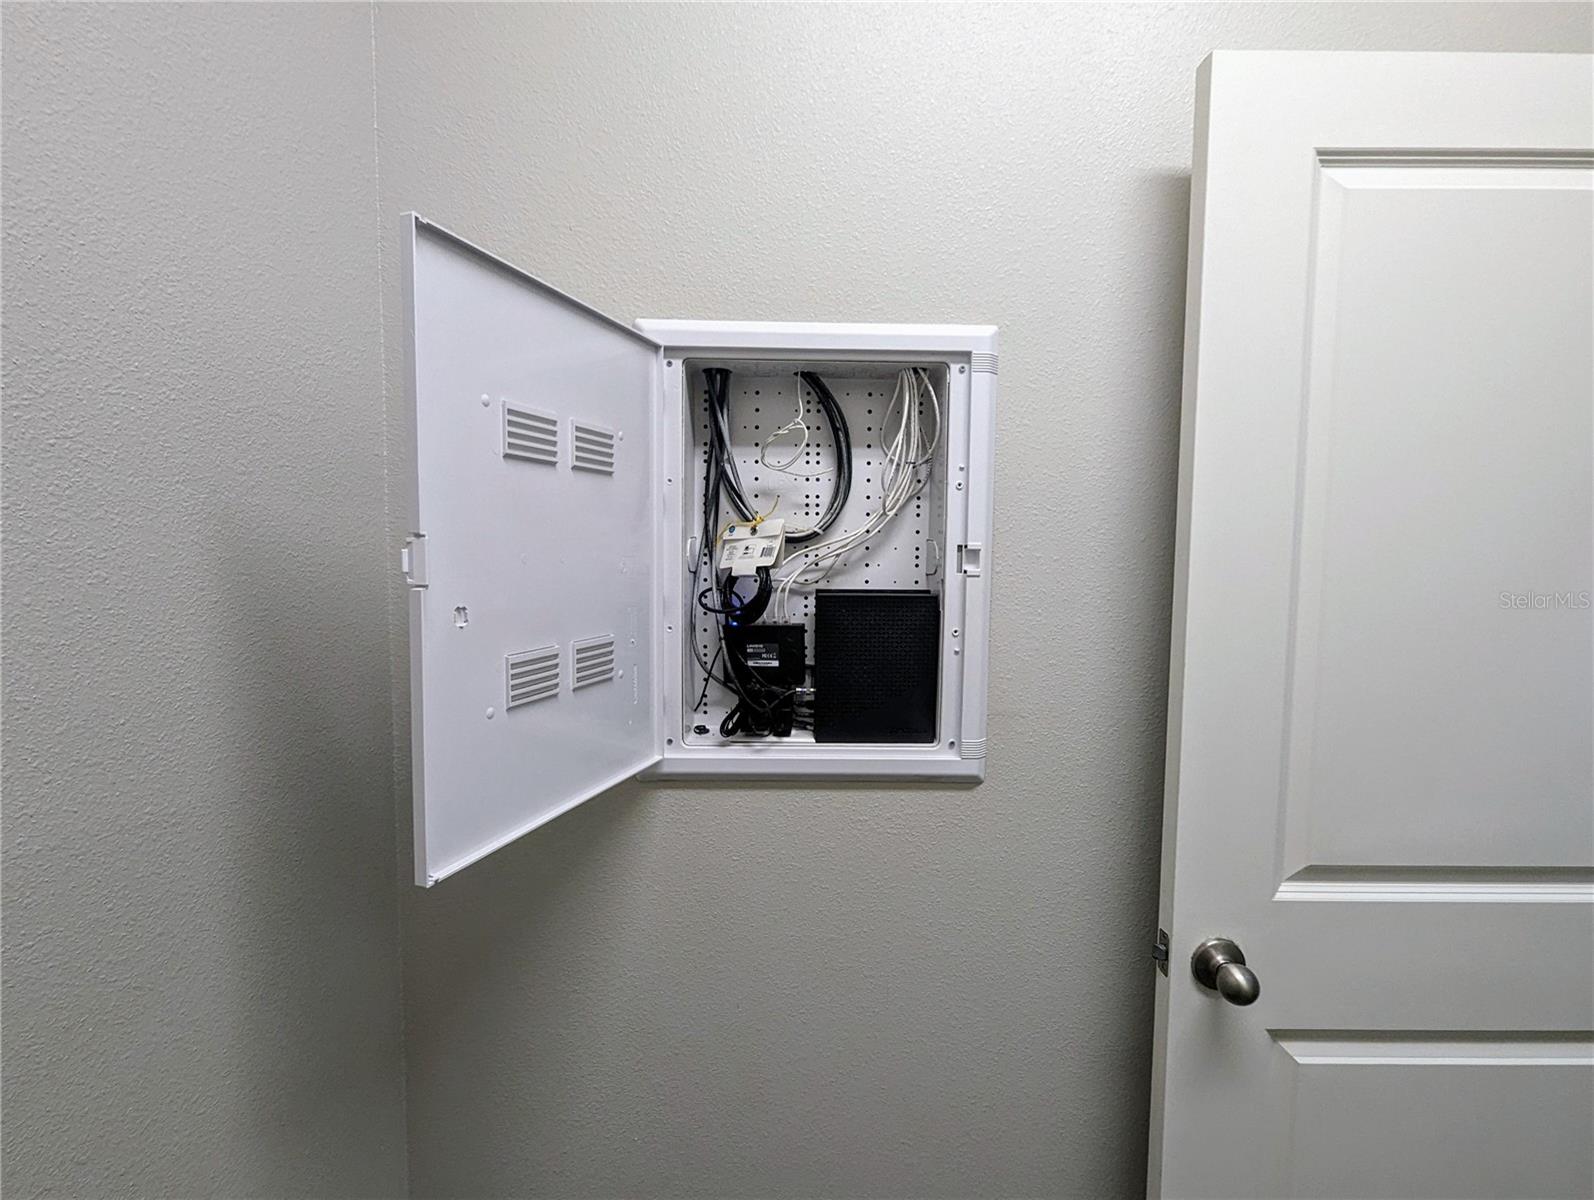 Smart Home Hookup in Laundry/Utility Closet